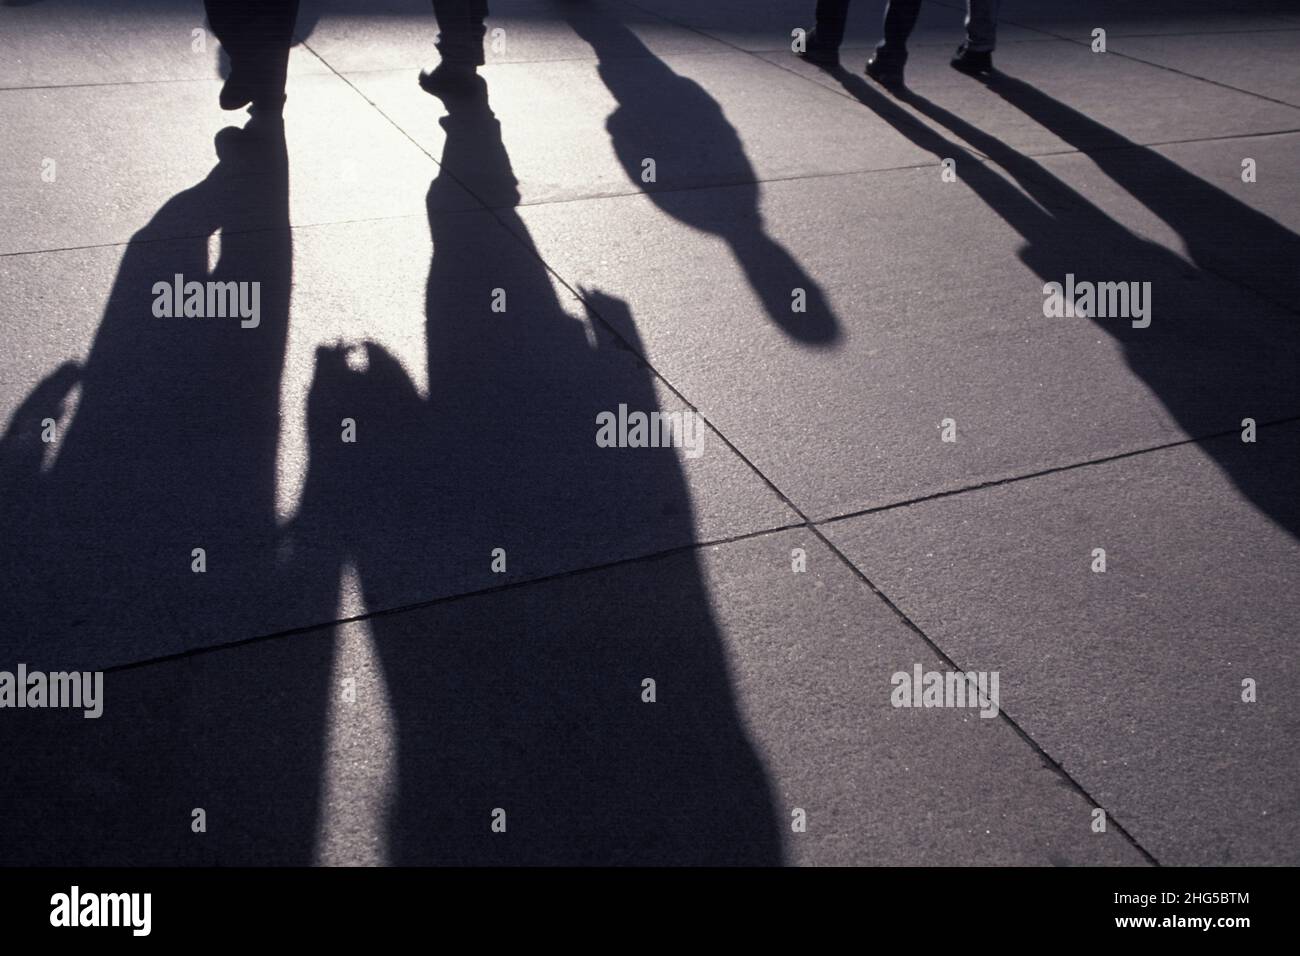 Shadows of people walking on the street. Group of unrecognizable commuters in rush hour. New York, New York City, Midtown Manhattan, USA Stock Photo